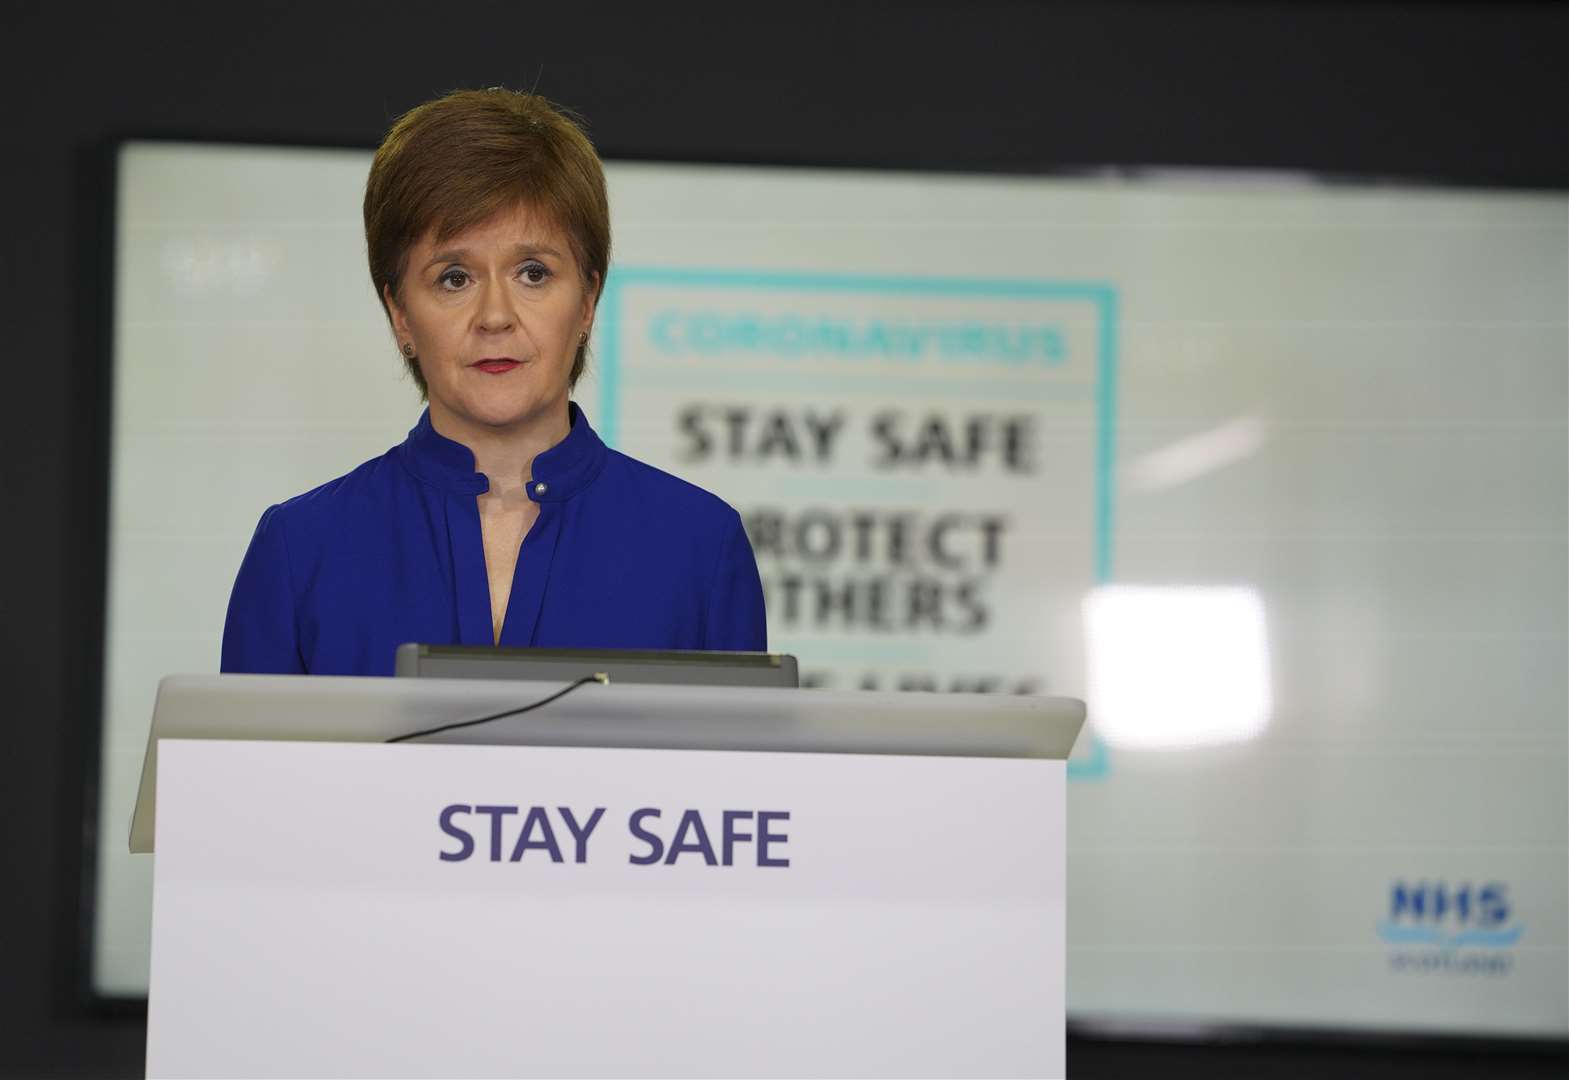 Nicola Sturgeon warned people to avoid public crowded places 'literally like the plague'.